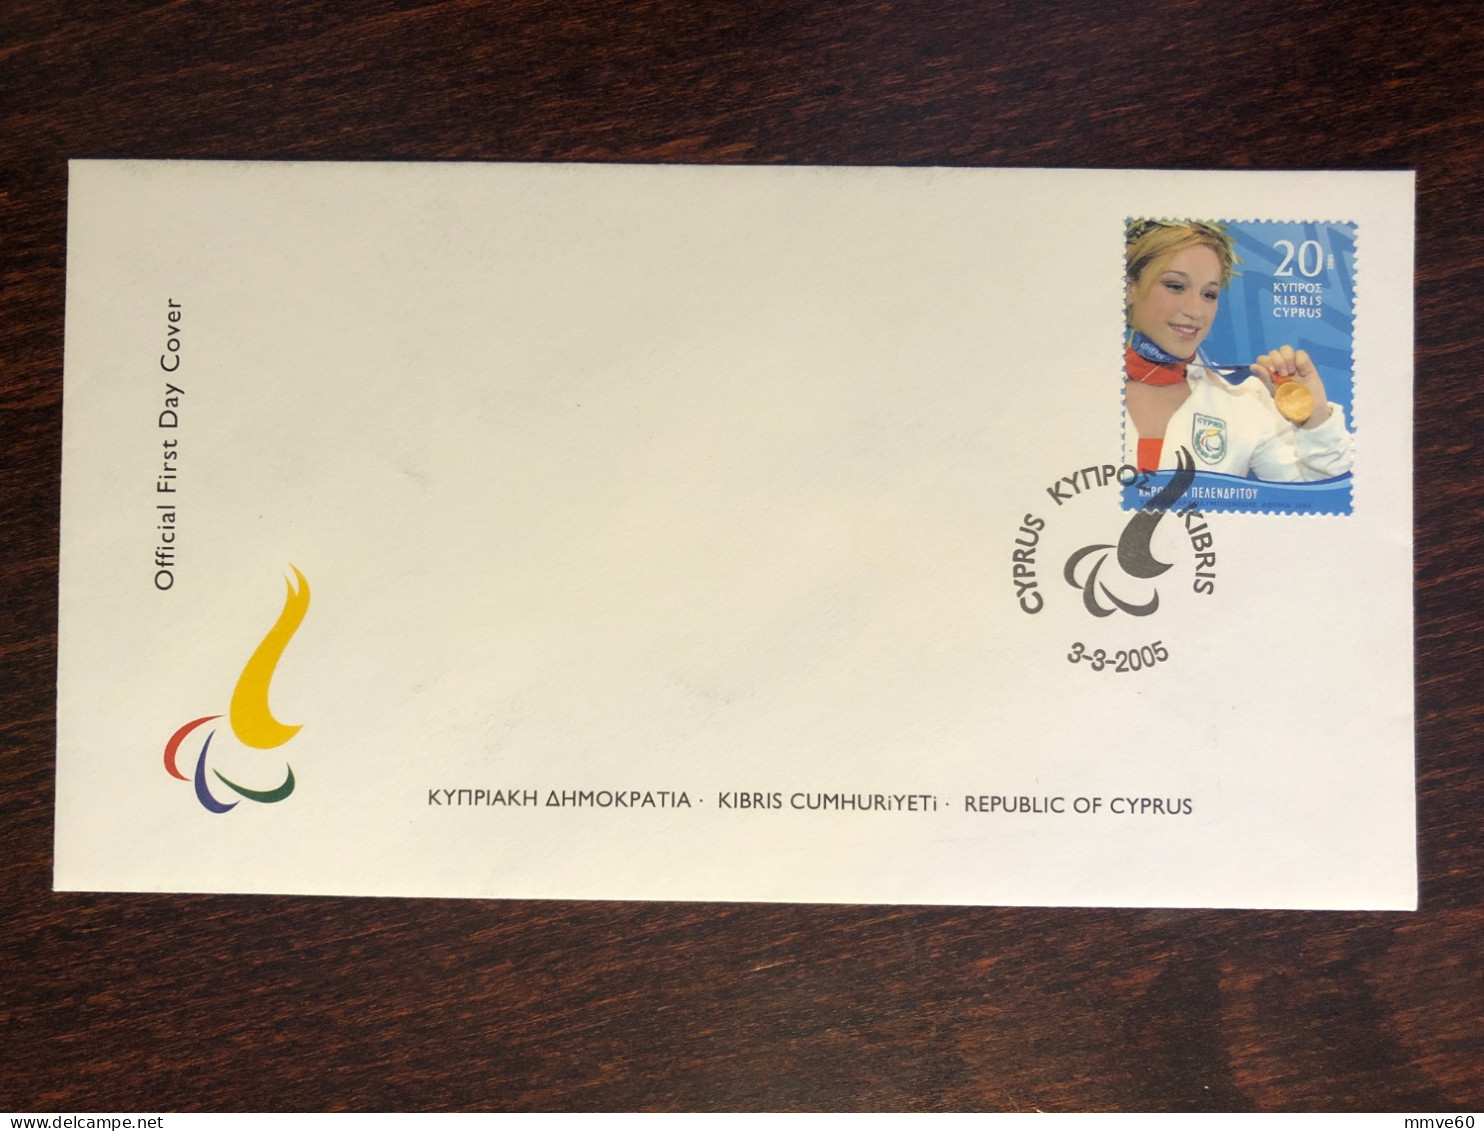 CYPRUS FDC COVER 2005 YEAR PARALYMPIC DISABLED SPORTS HEALTH MEDICINE STAMPS - Covers & Documents